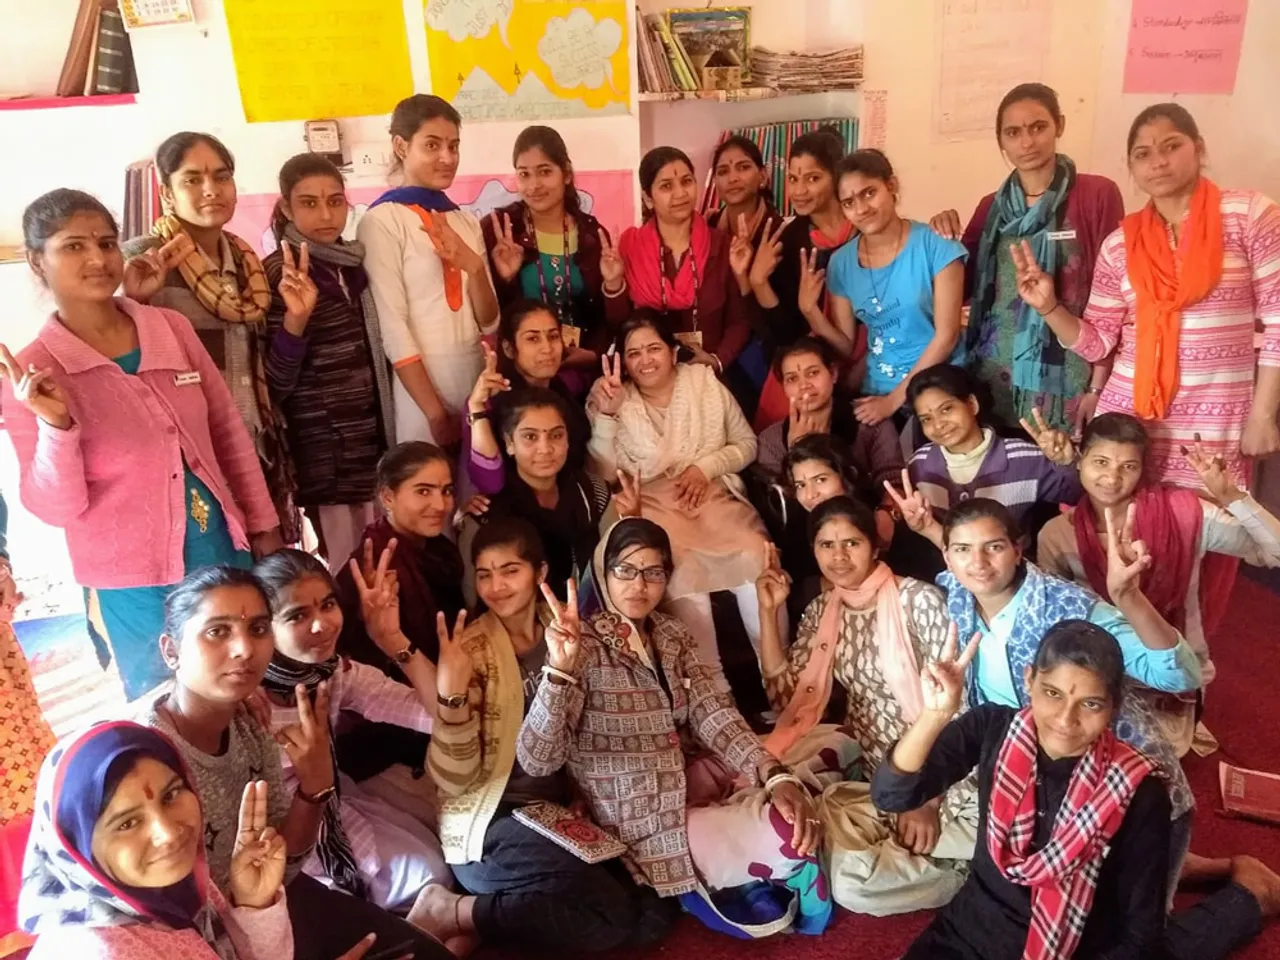 This Jaipur NGO has brought a SMILE to thousands of women and children